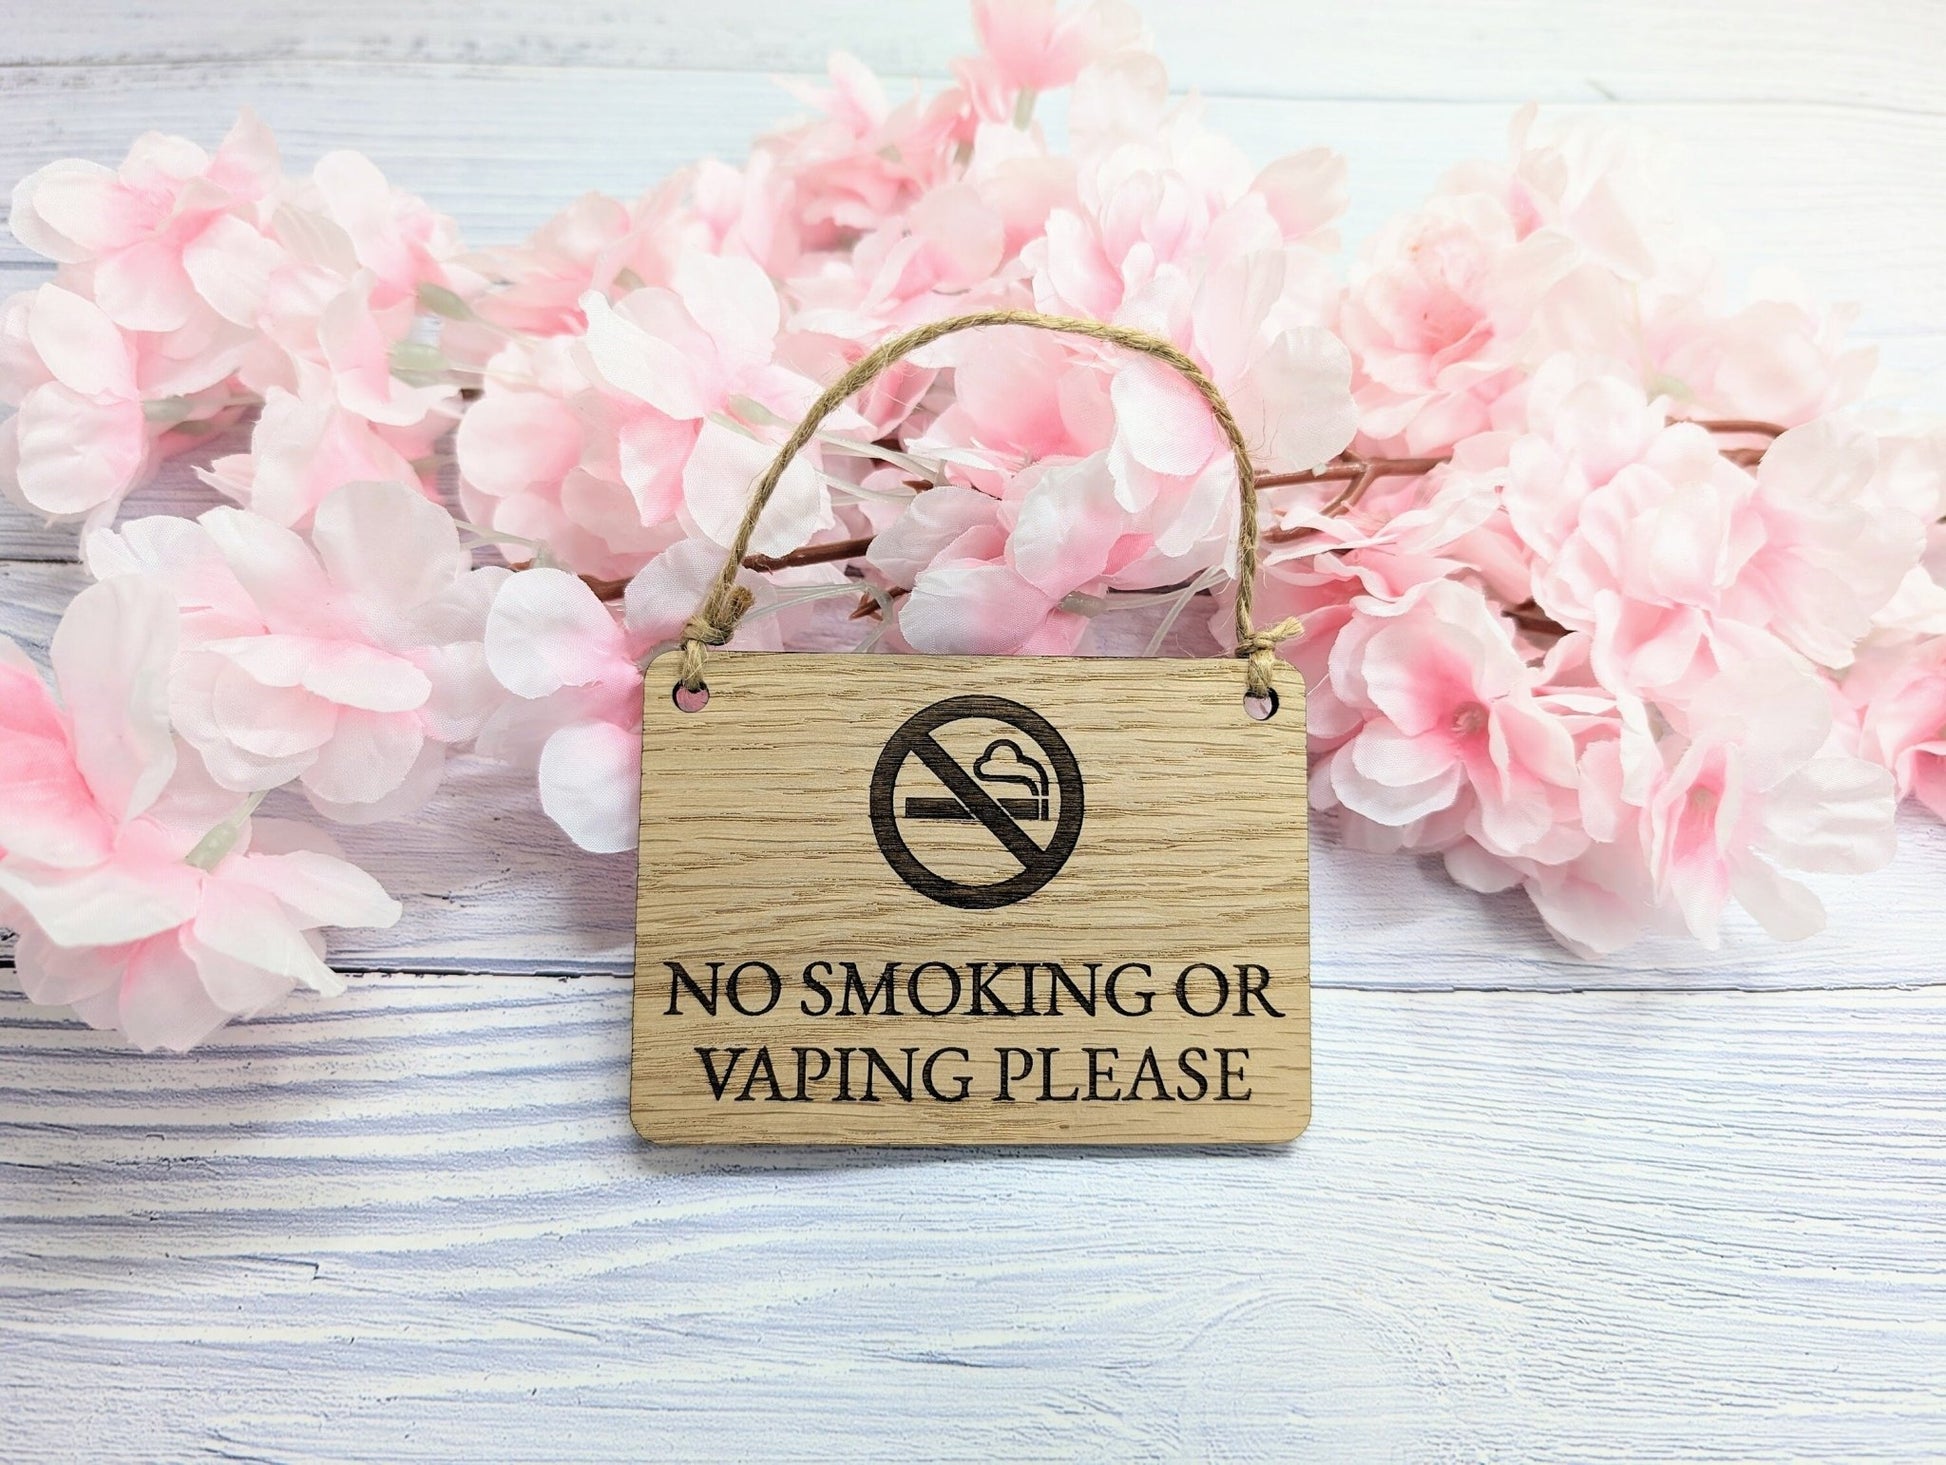 No Smoking or Vaping Please" Wooden Sign | Oak Veneered MDF | 4 Sizes | Handcrafted in Wales | Eco-Friendly - CherryGroveCraft